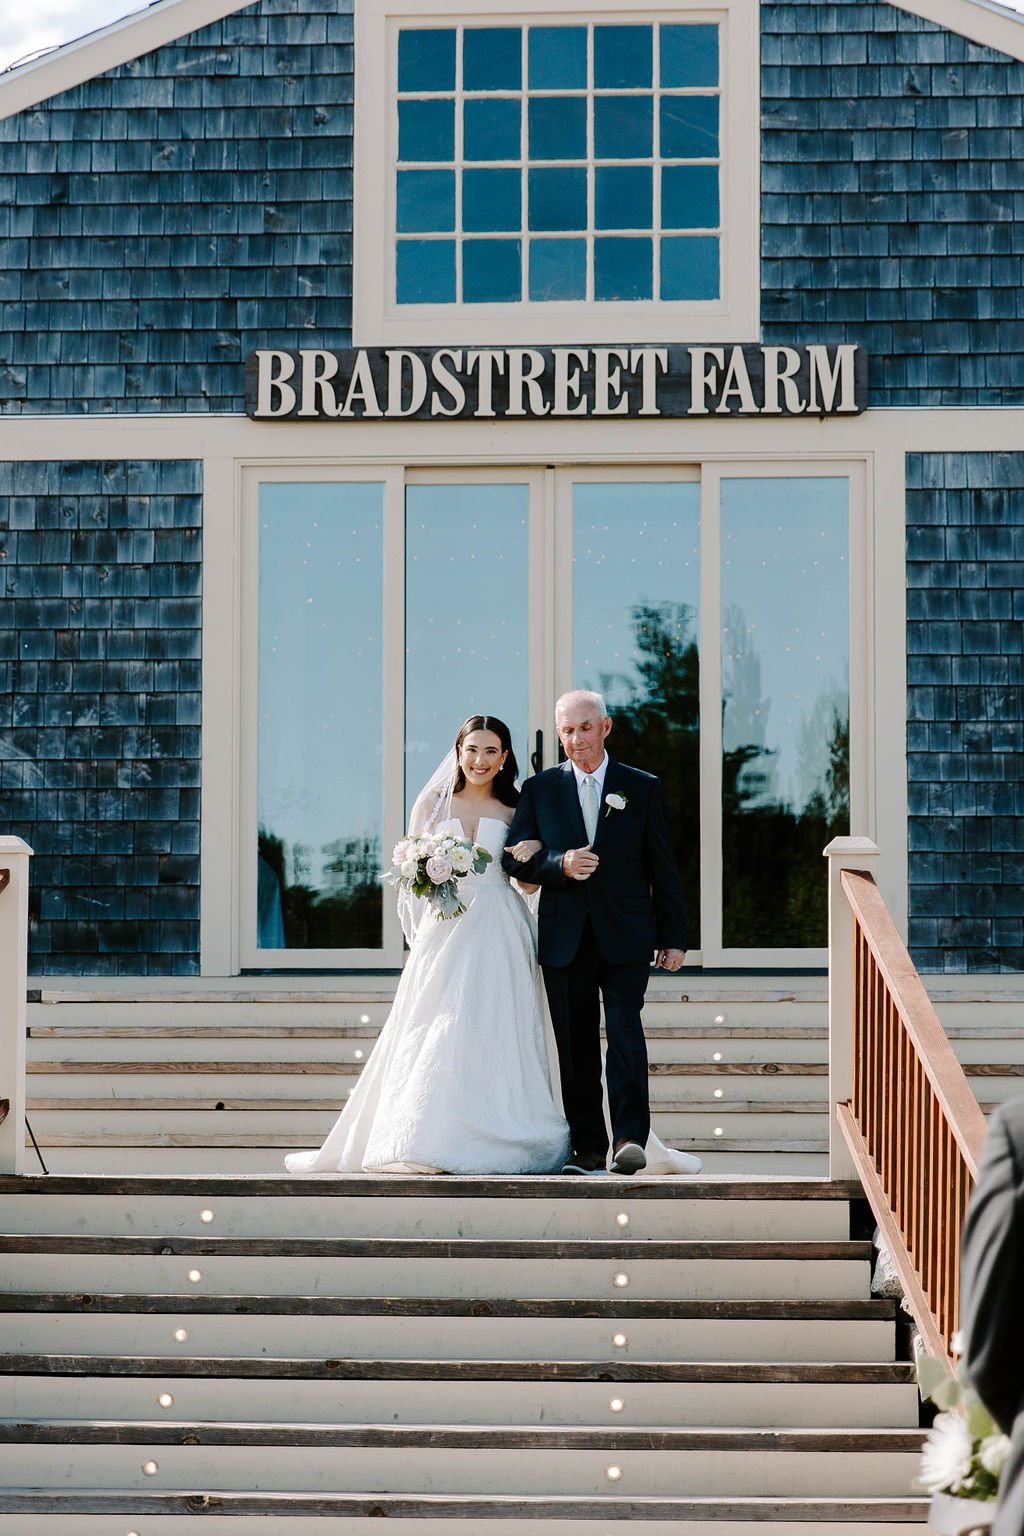 Bride walking down steps with father towards wedding aisle 